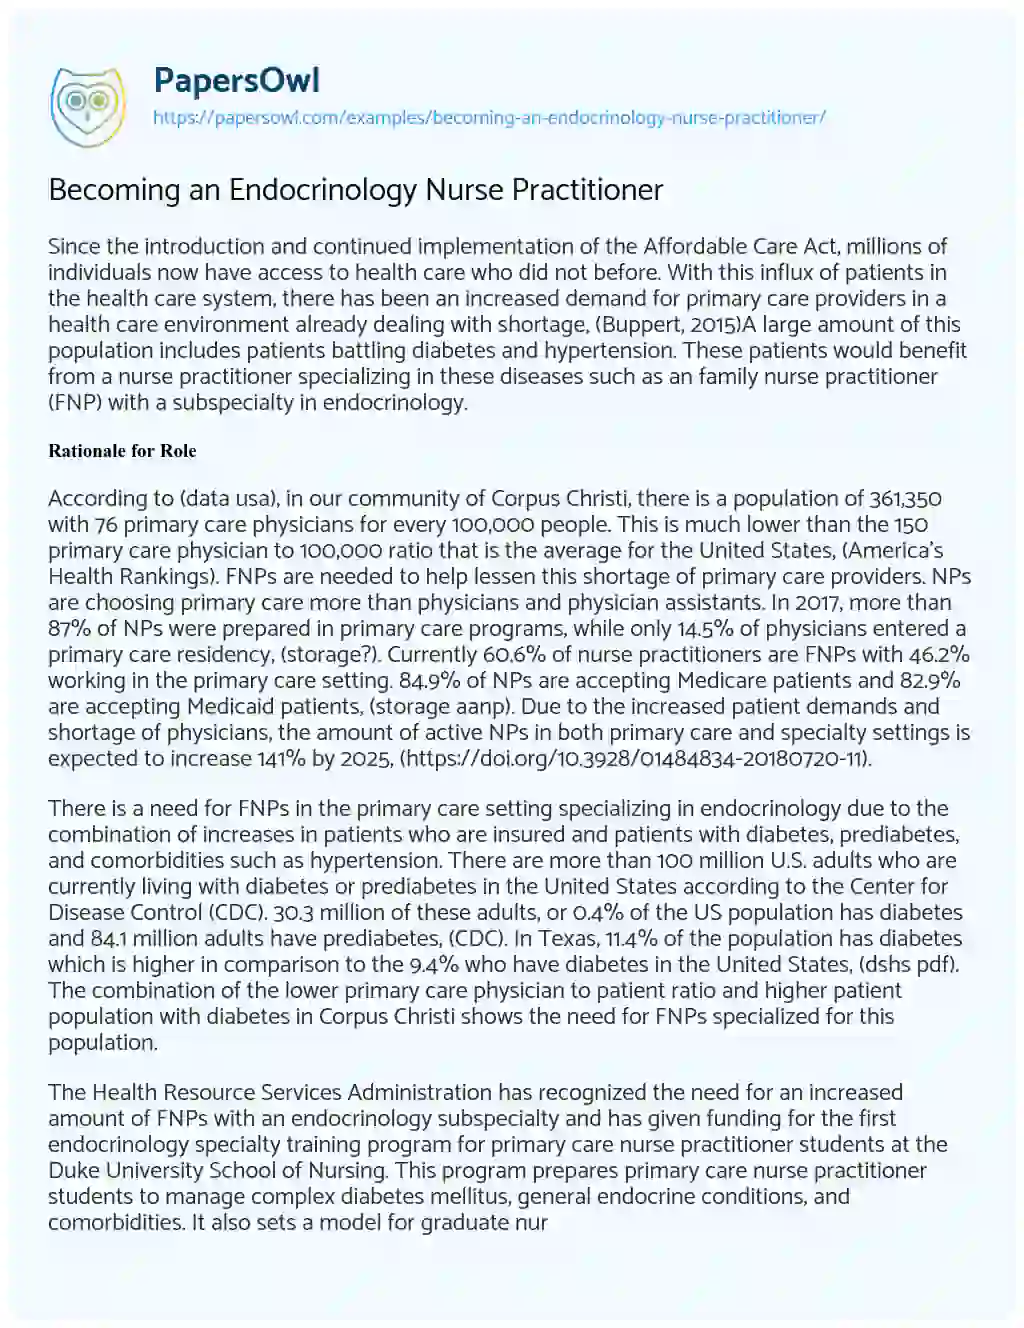 Essay on Becoming an Endocrinology Nurse Practitioner